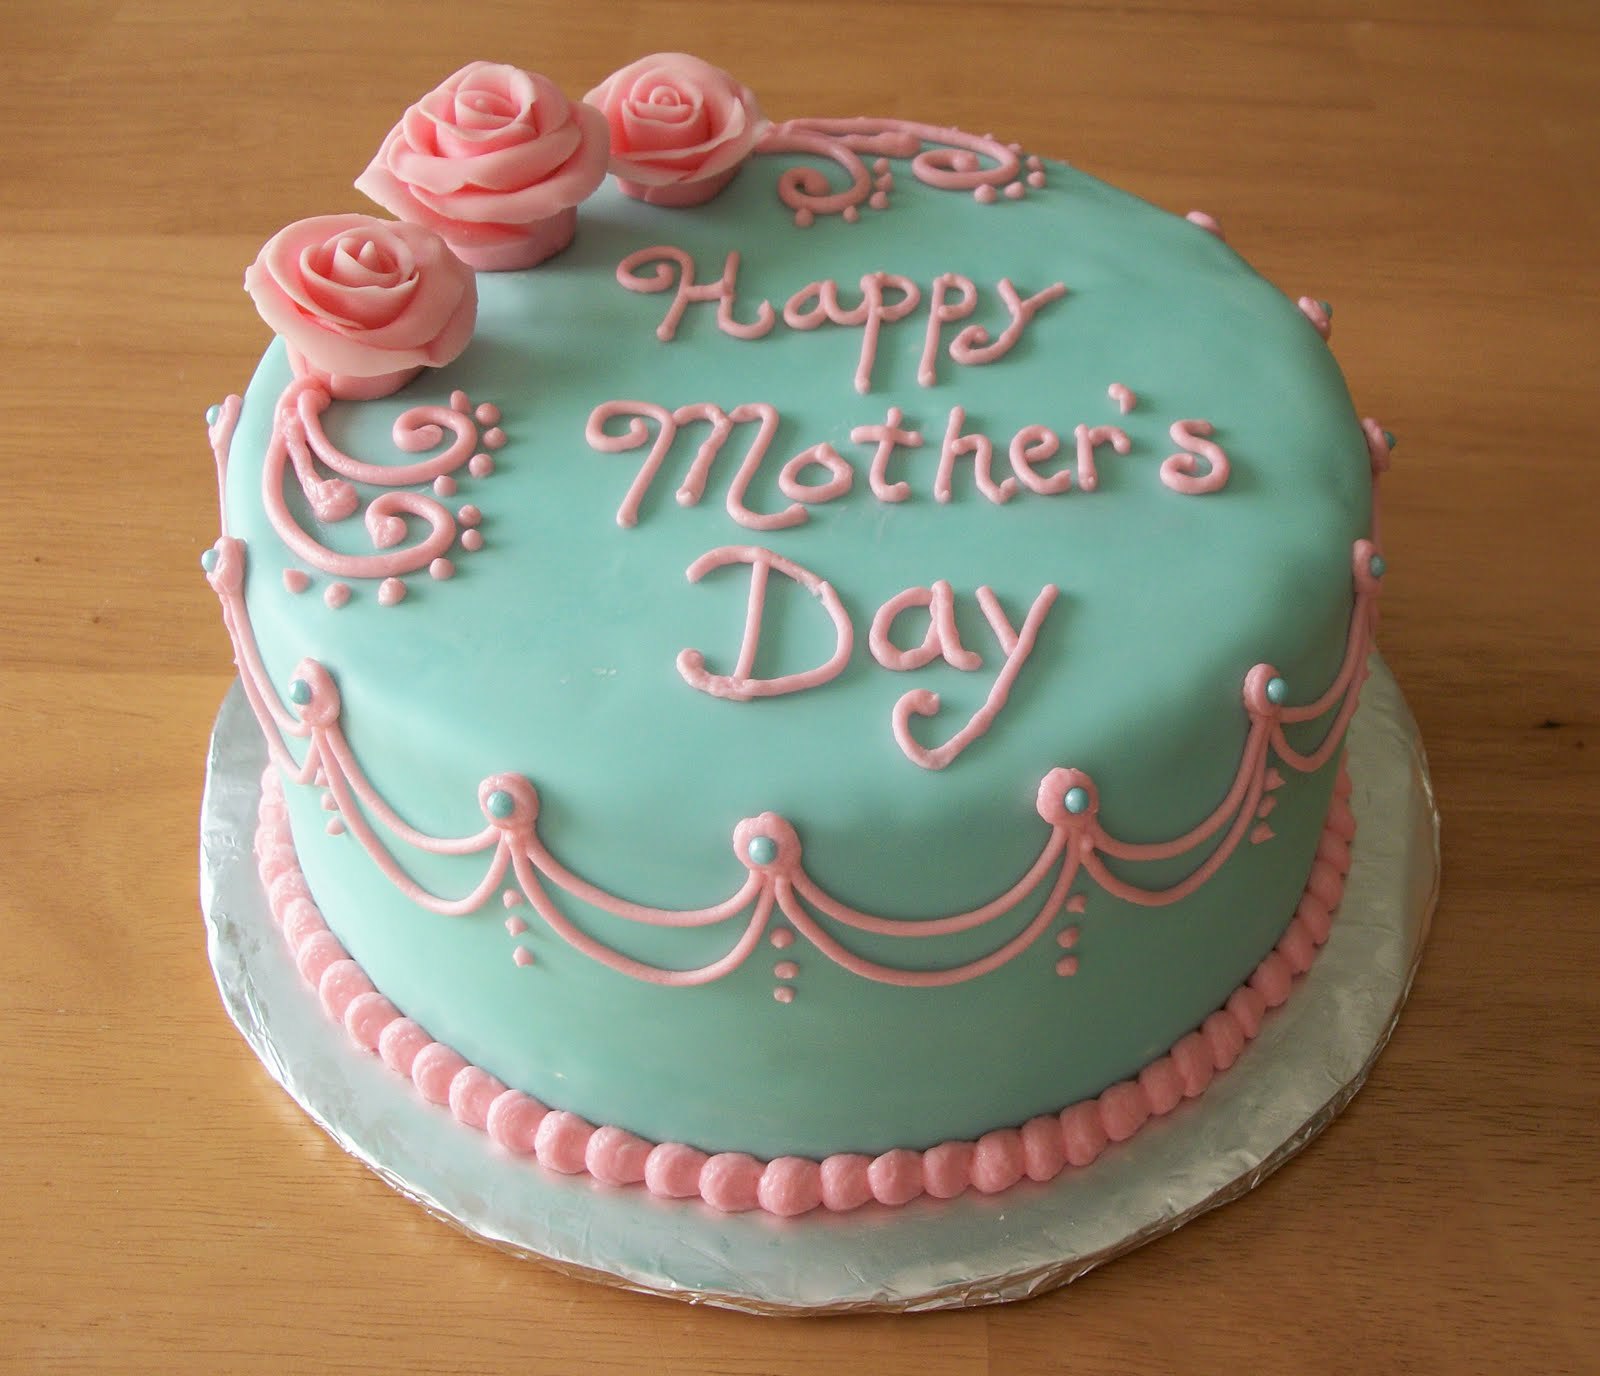 Happy Mothers Day Cake 2016